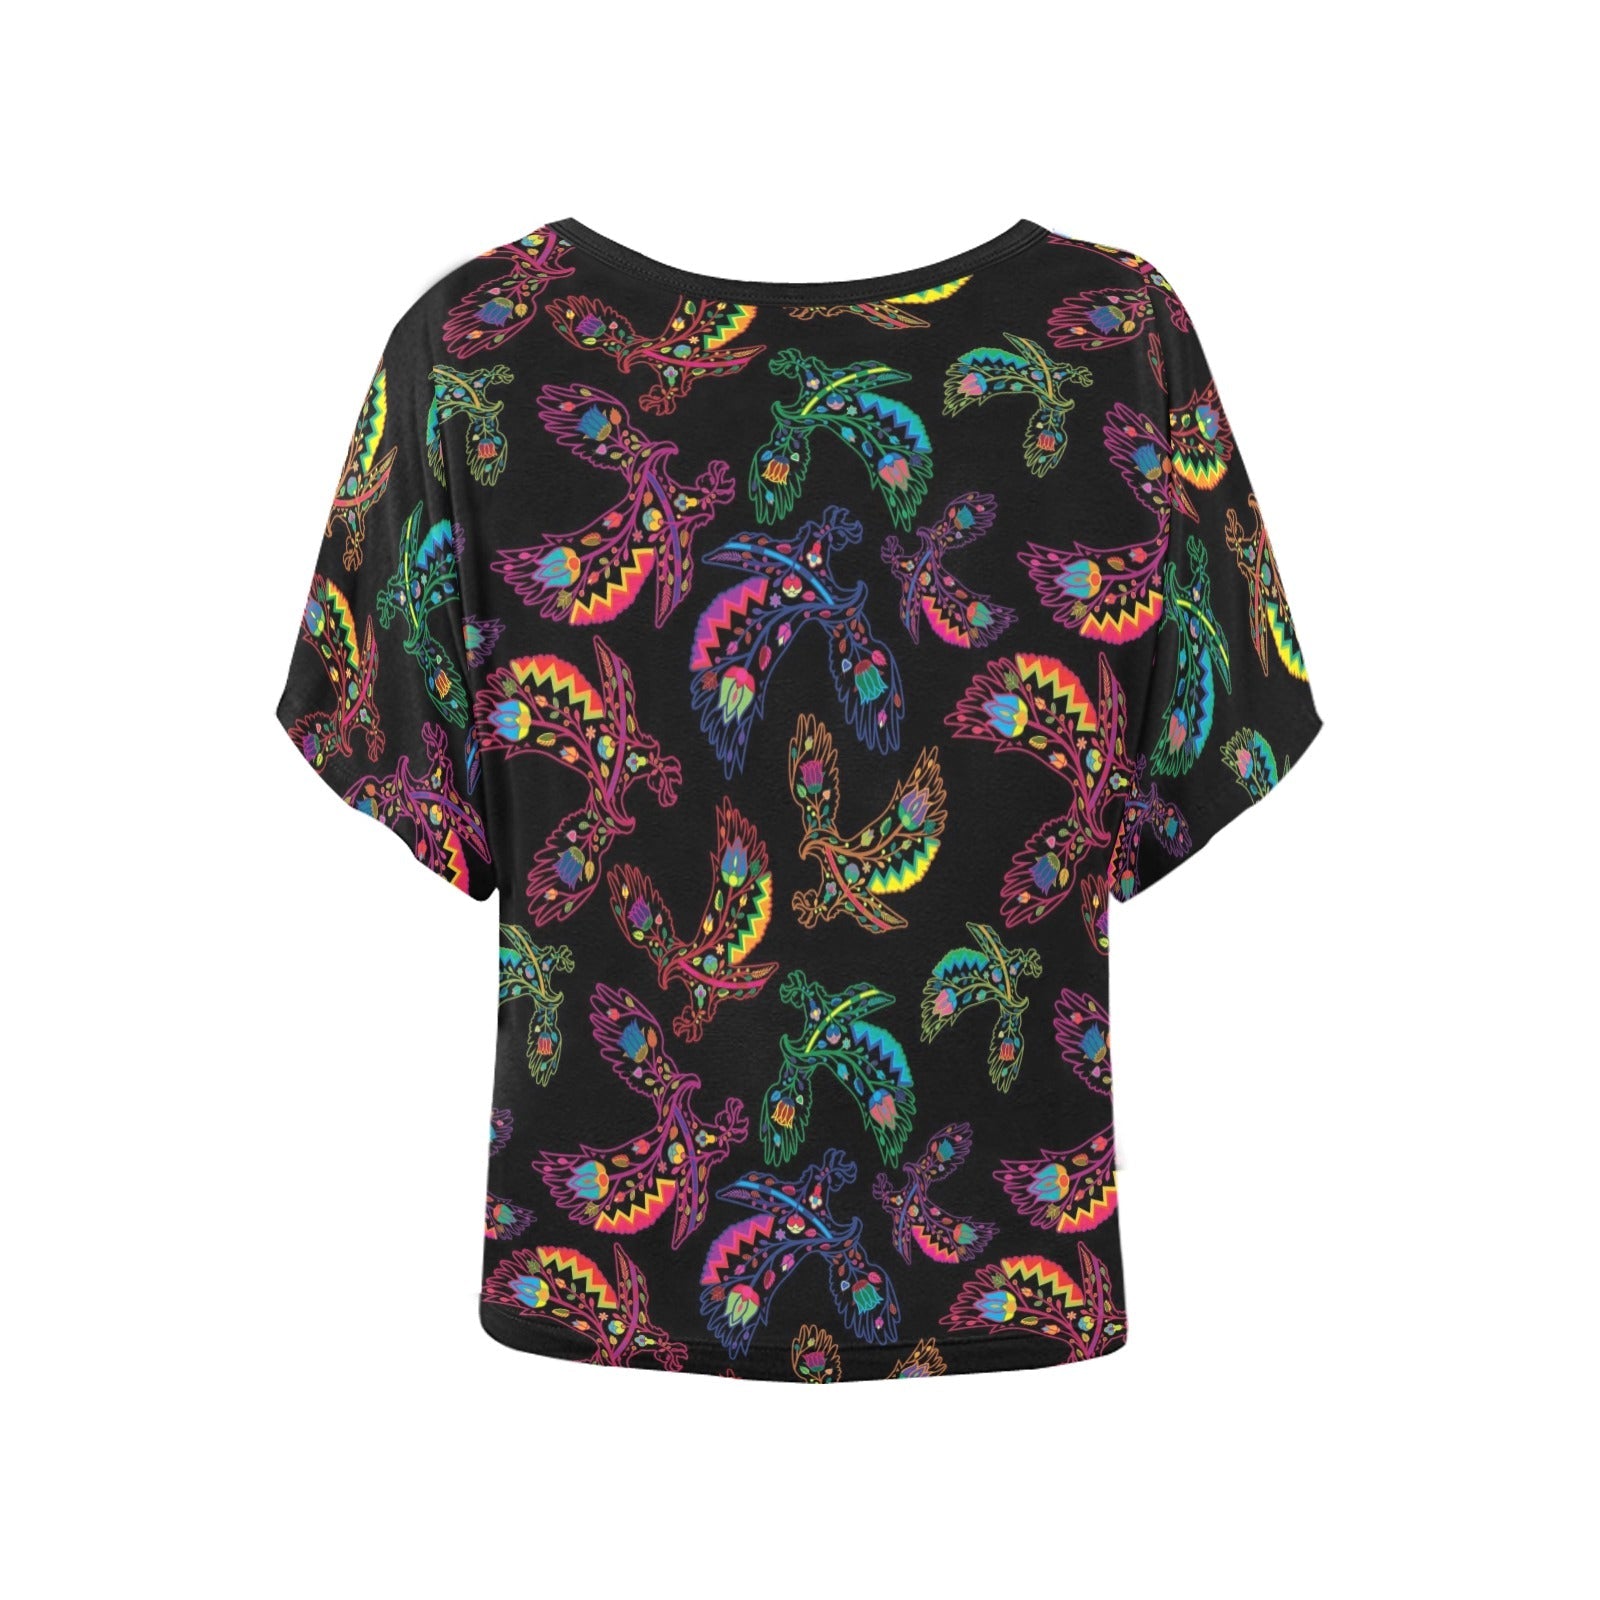 Neon Floral Eagles Women's Batwing-Sleeved Blouse T shirt (Model T44) Women's Batwing-Sleeved Blouse T shirt (T44) e-joyer 